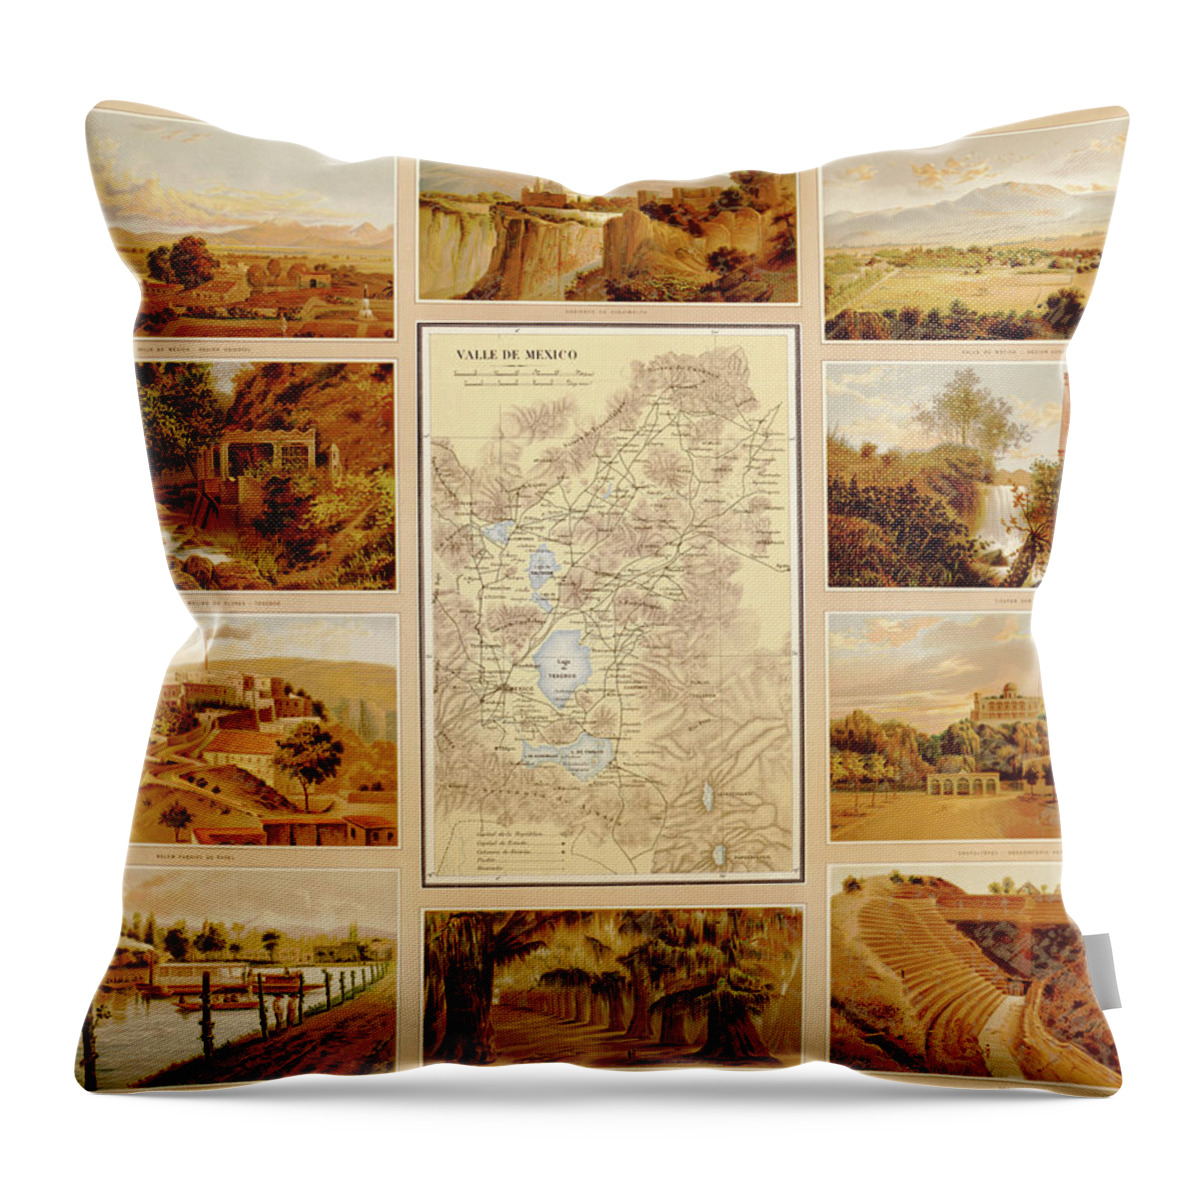 Mexico Throw Pillow featuring the drawing Mexican Landscapes by Vintage Maps